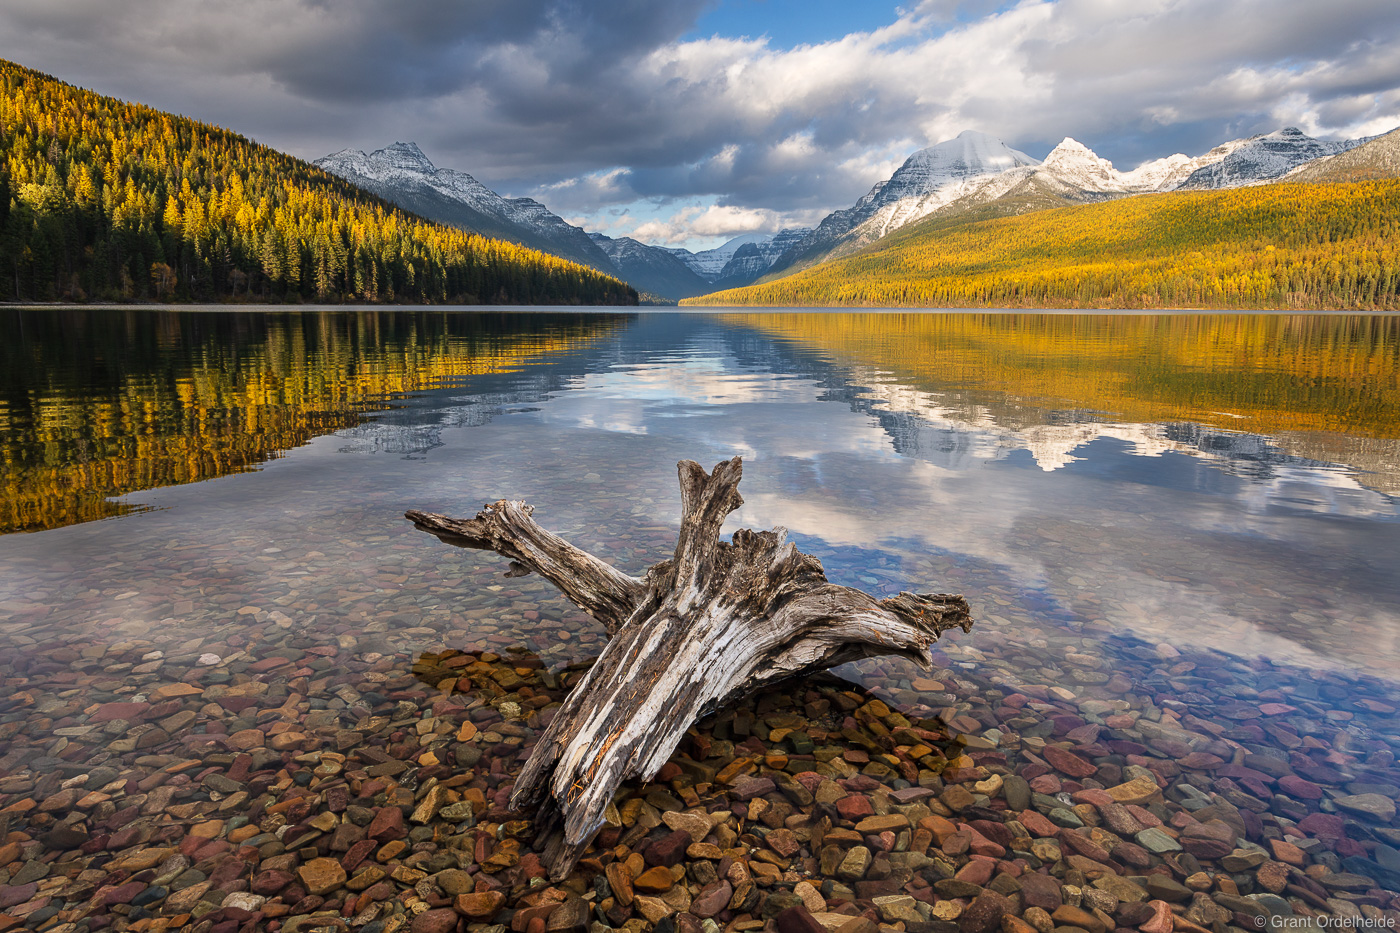 Fresh snow and yellow foliage along the shores of Bowman Lake in Glacier National Park.